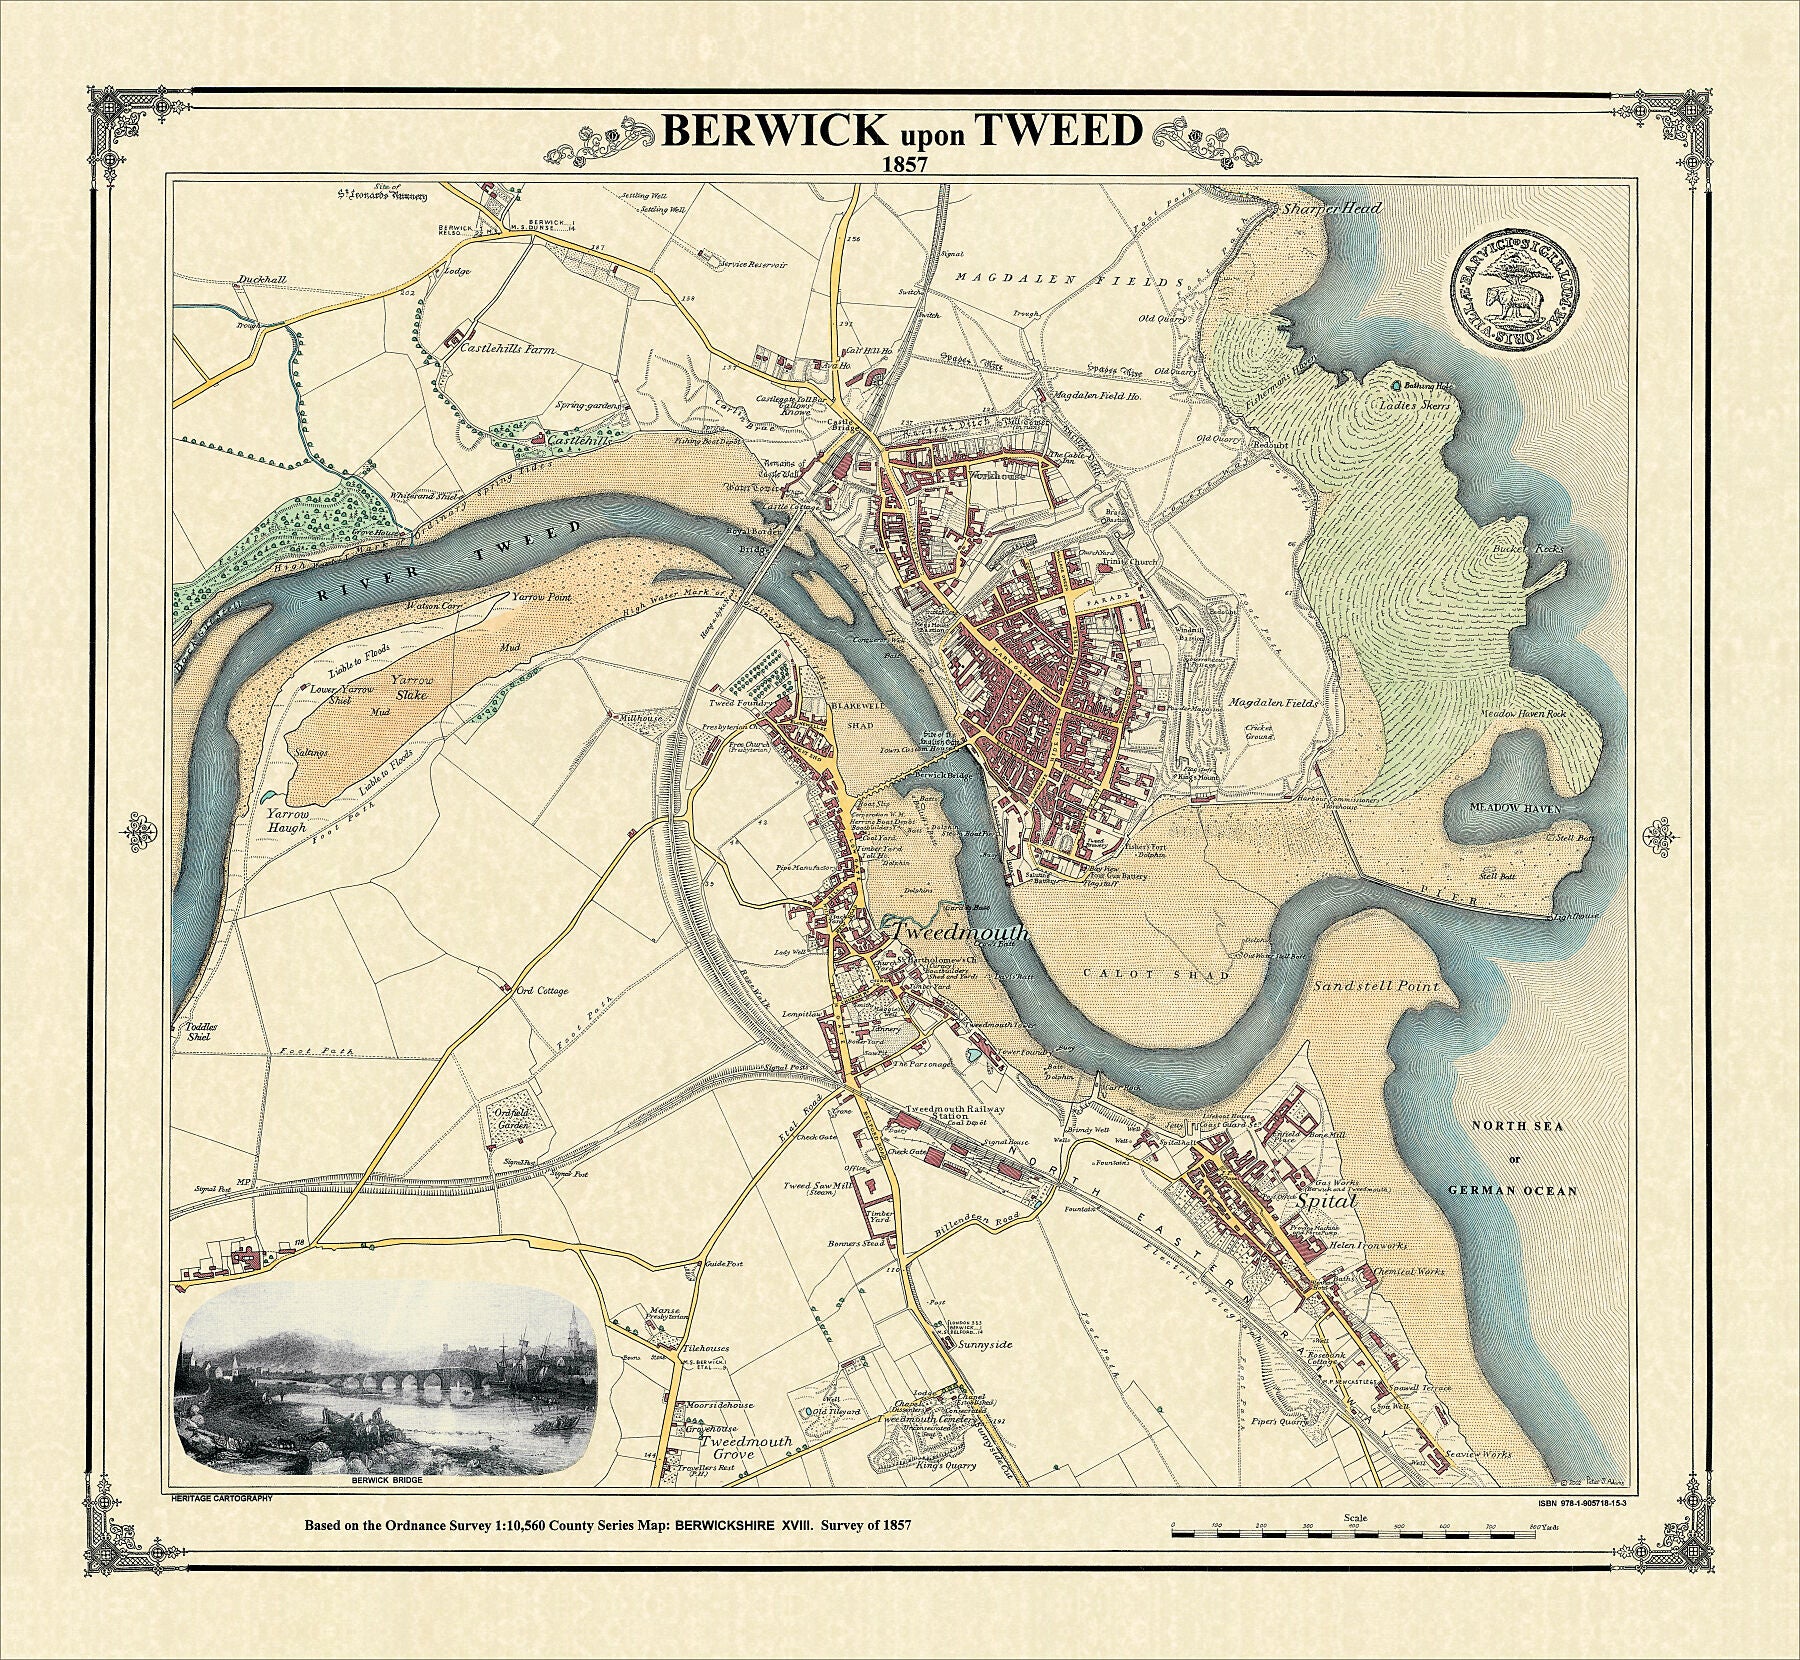 Coloured Victorian map of Berwick-upon-Tweed in 1857 by Peter J Adams of Heritage Cartography